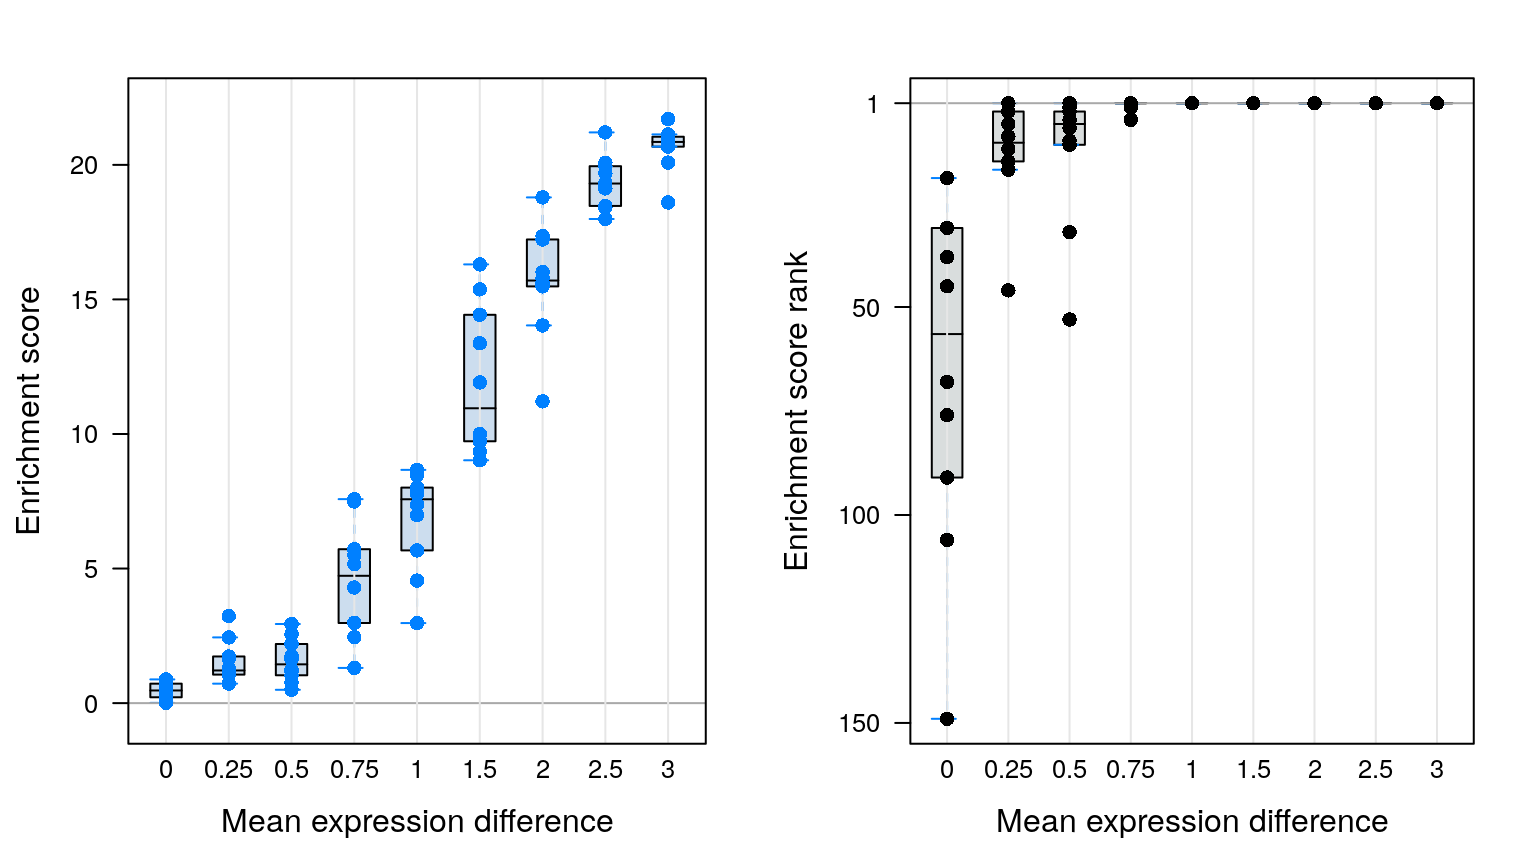 **Figure 1:** Sensitivity benchmark. Expression levels of genes in the ovary signature are dedicately sampled randomly from normal distributions with different mean values. Left panel: enrichment scores reported by *BioQC* for the ovary signature, plotted against the differences in mean expression values; Right panel: rank of ovary enrichment scores in all 155 signatures plotted against the difference in mean expression values.